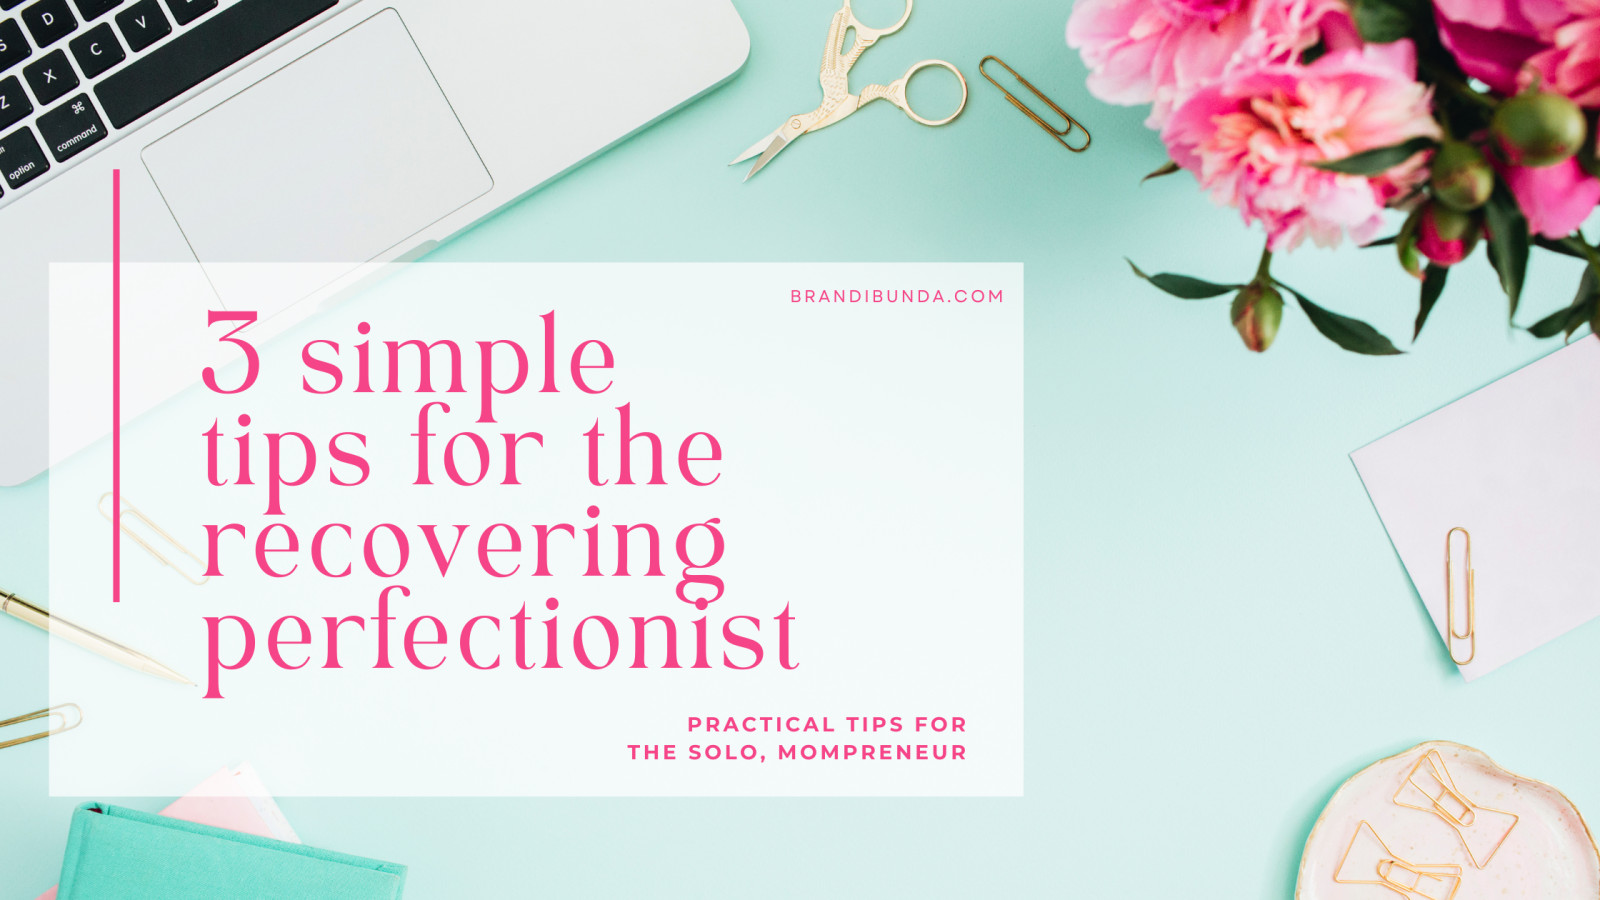 3 Simple Tips for the Recovering Perfectionist 